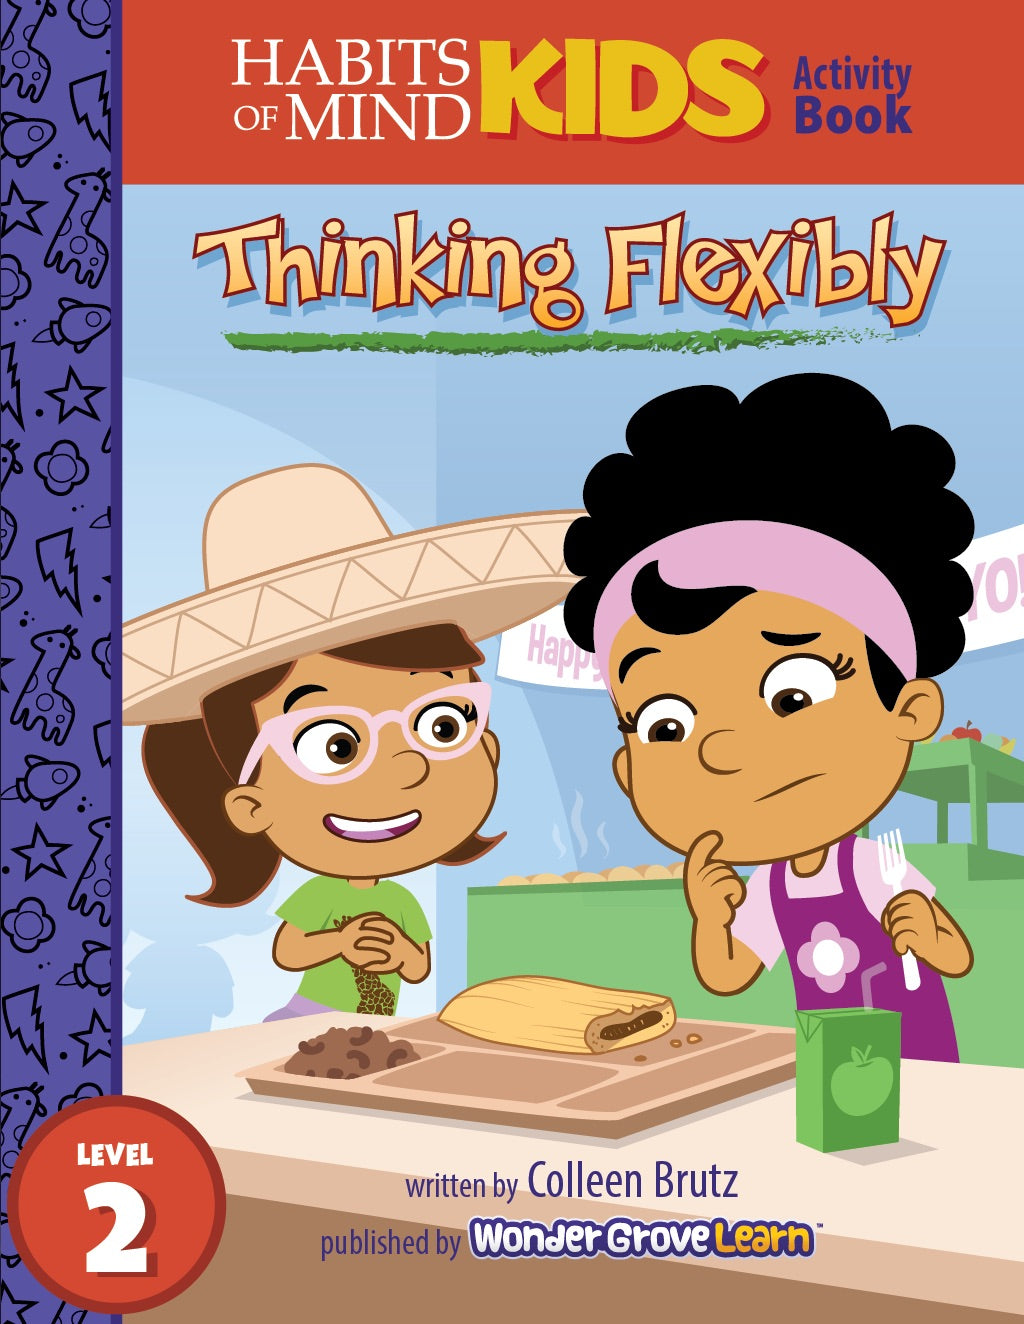 Thinking Flexibly: A Habits of Mind Story for Second Grade